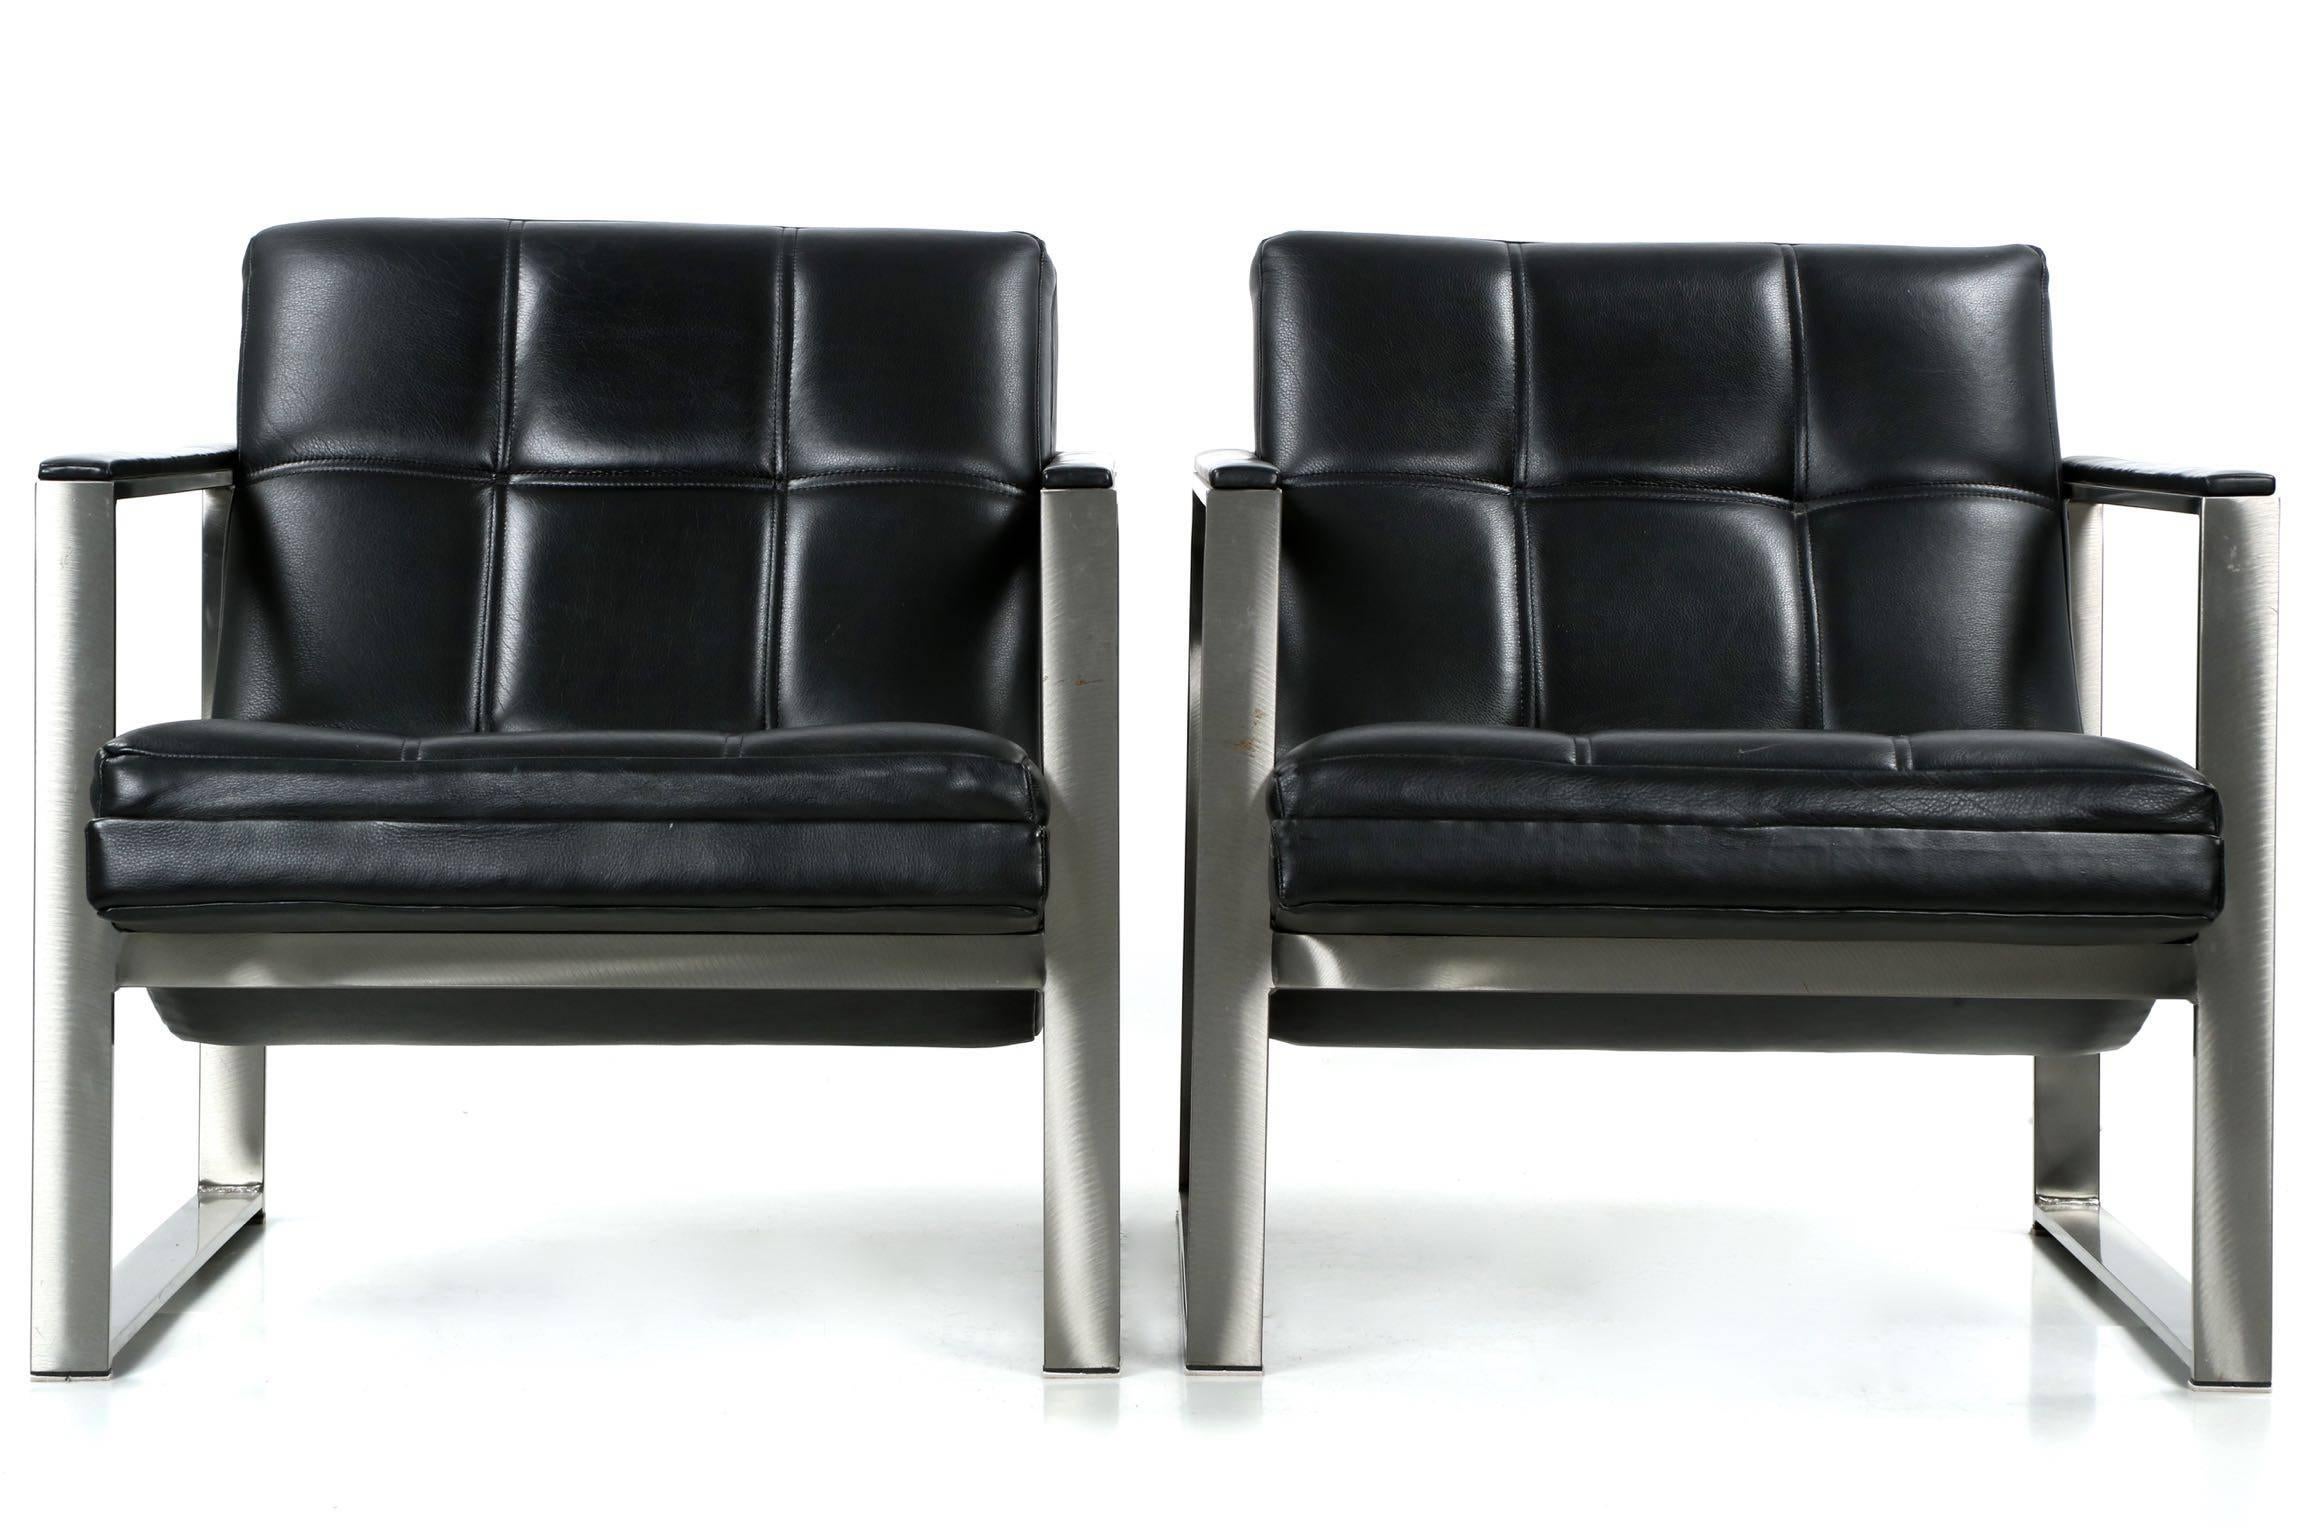 An angular pair of late 20th century sculpted lounge chairs, both retain their original labels from Villency Pure Designs. The brushed steel structure is inordinately heavy and well crafted, the lacquered steel in quite excellent condition with only